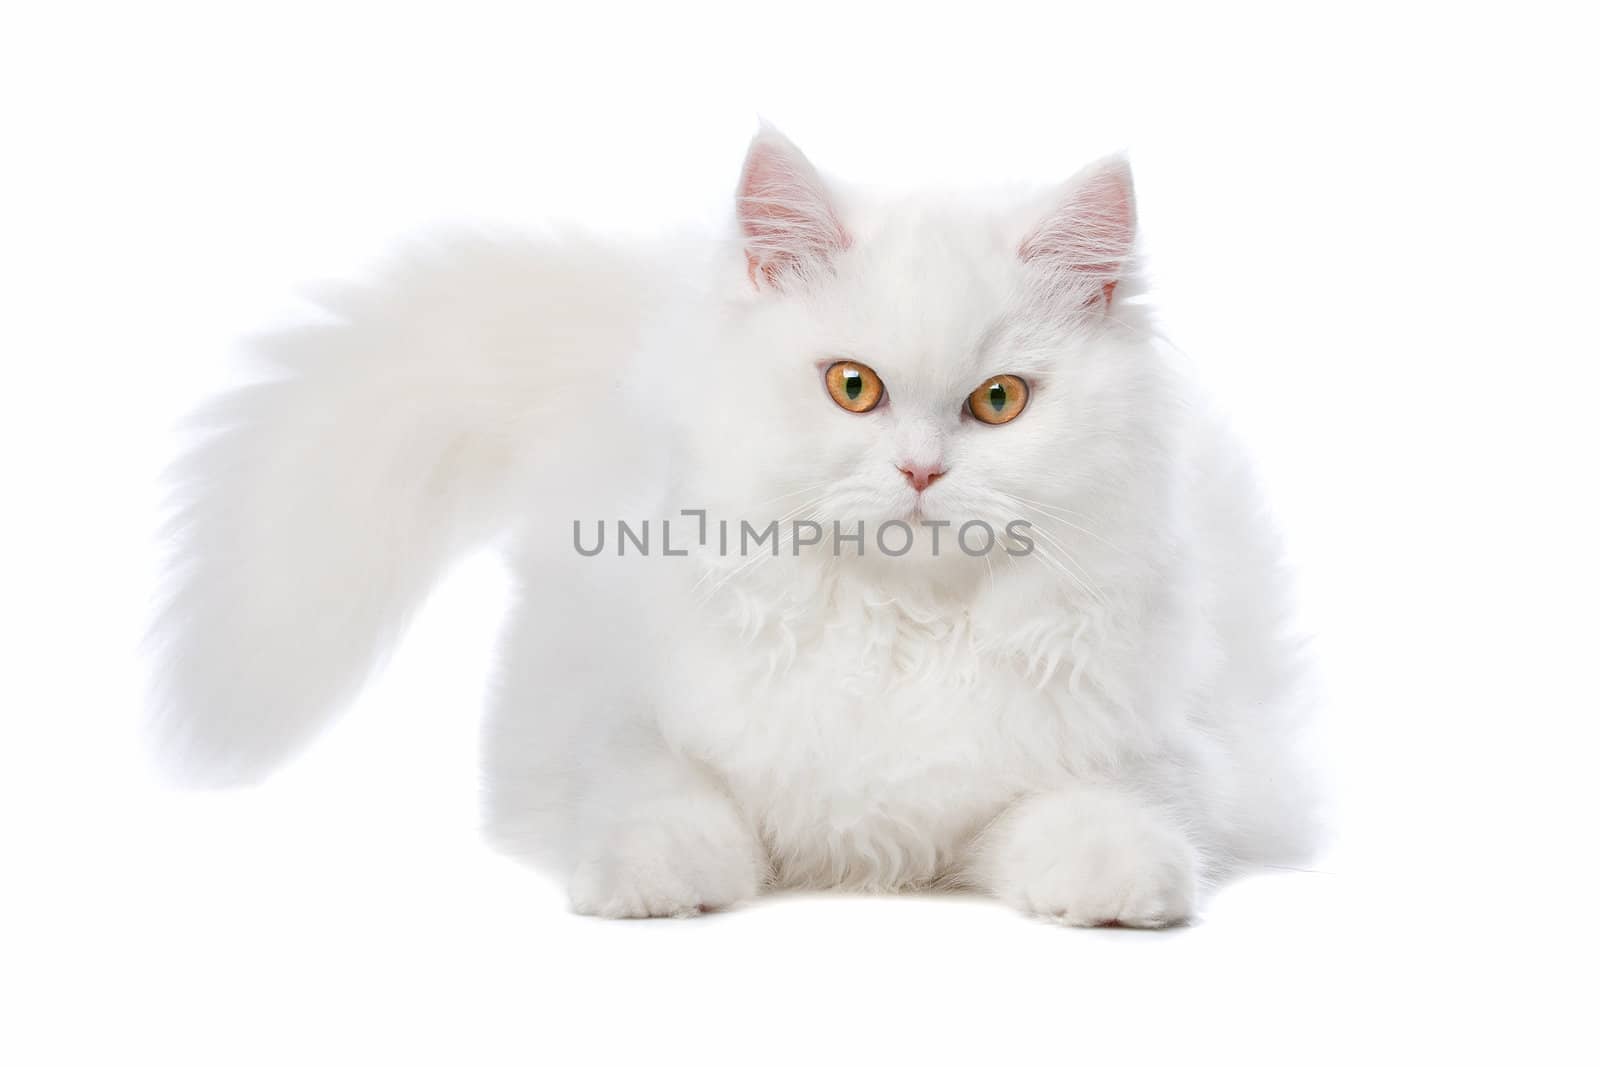 White cat with yellow eyes by eriklam